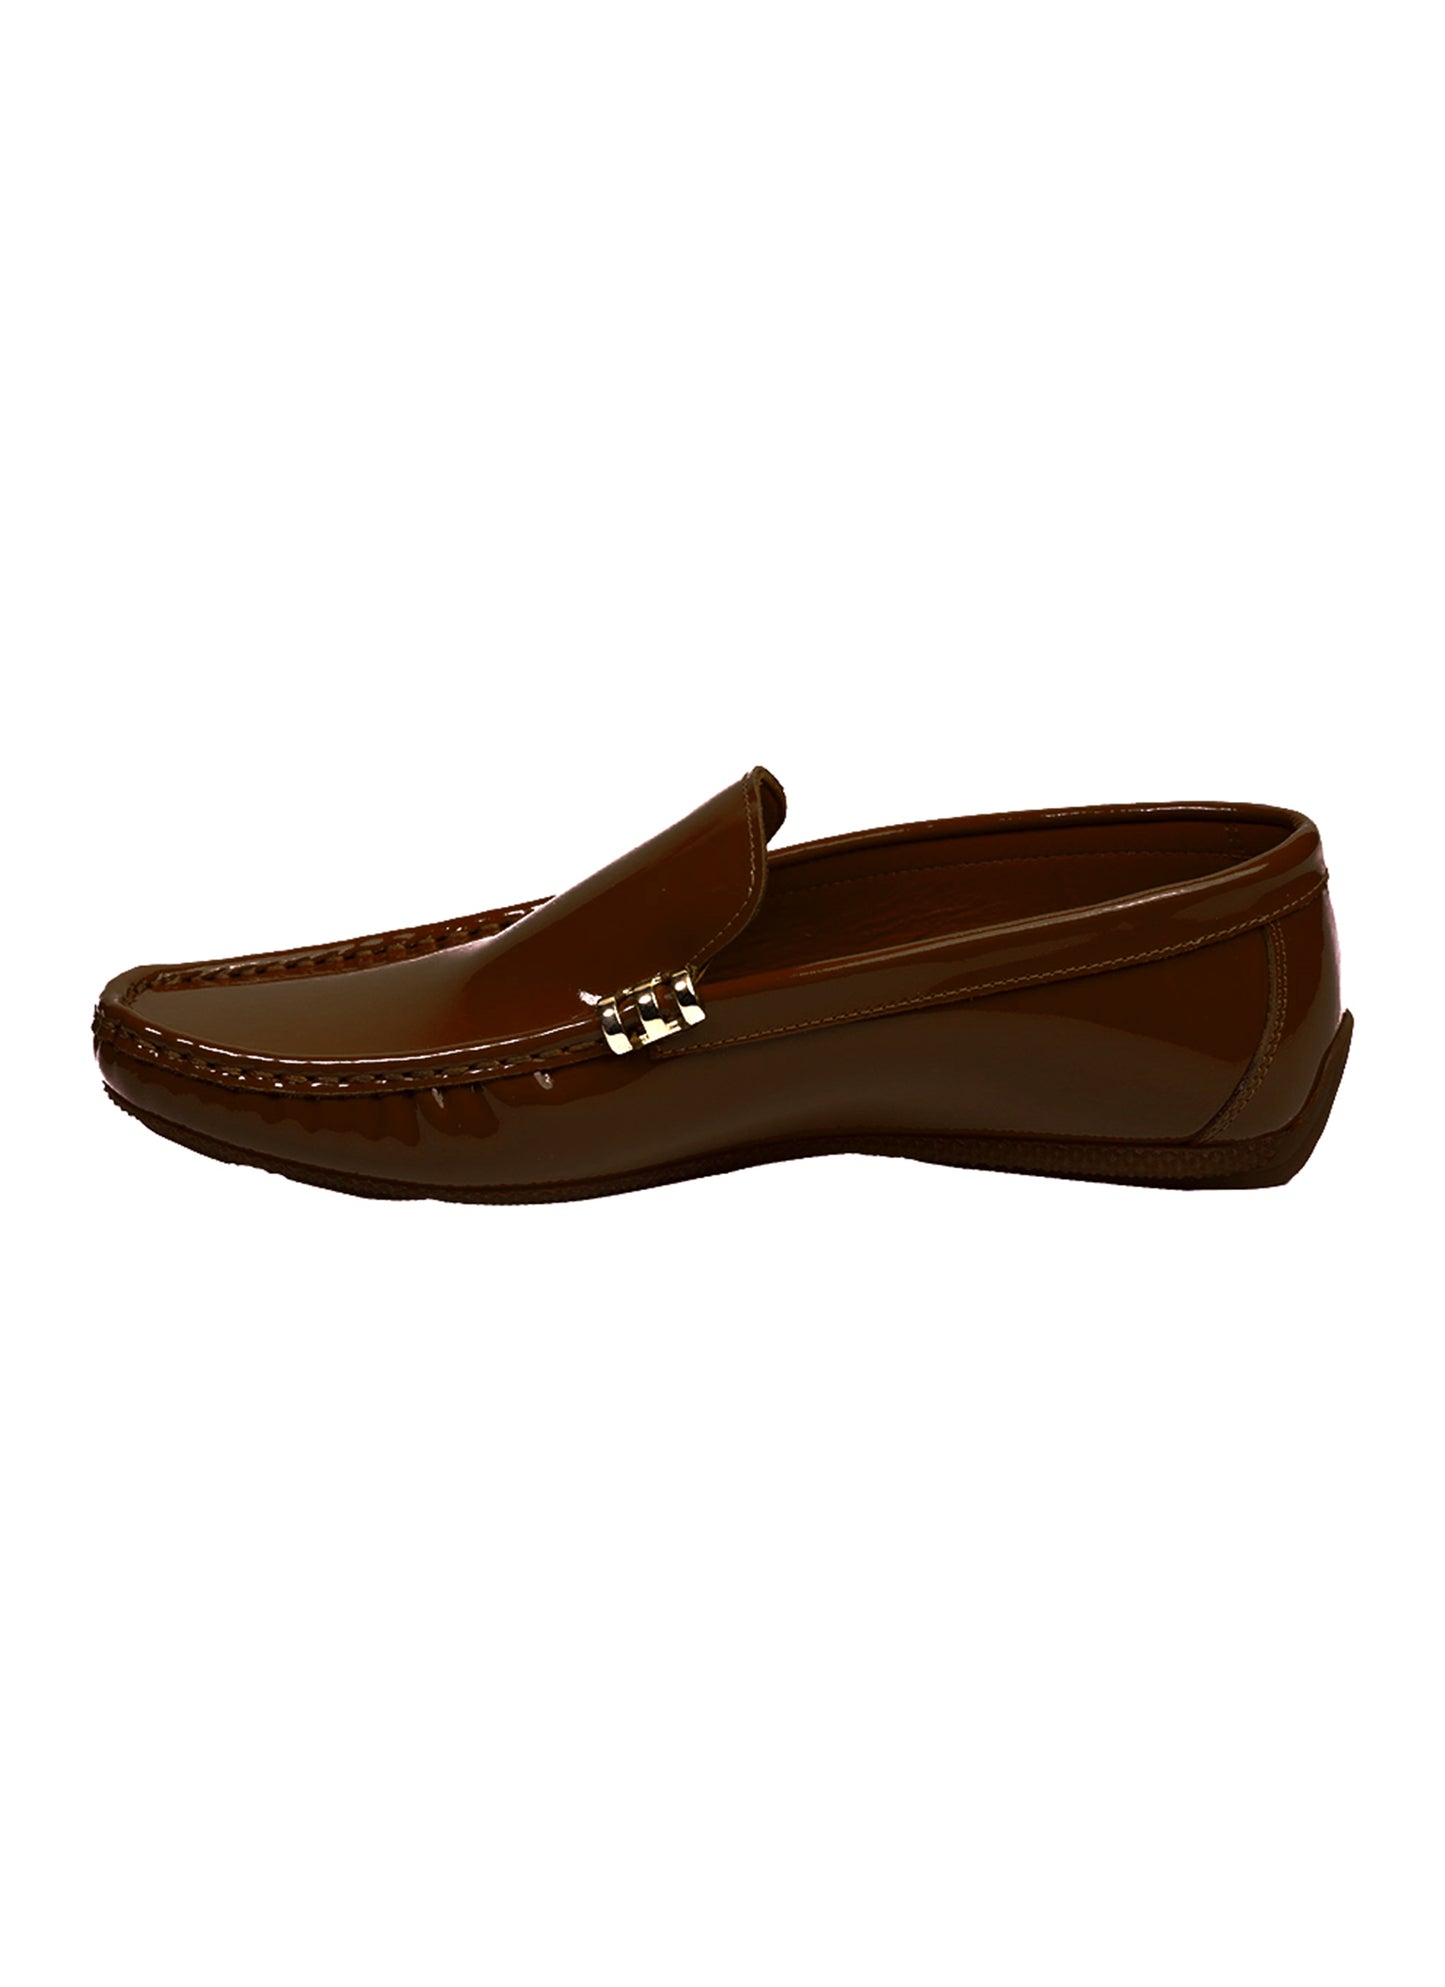 Vercini Luxe Patent Leather Loafers